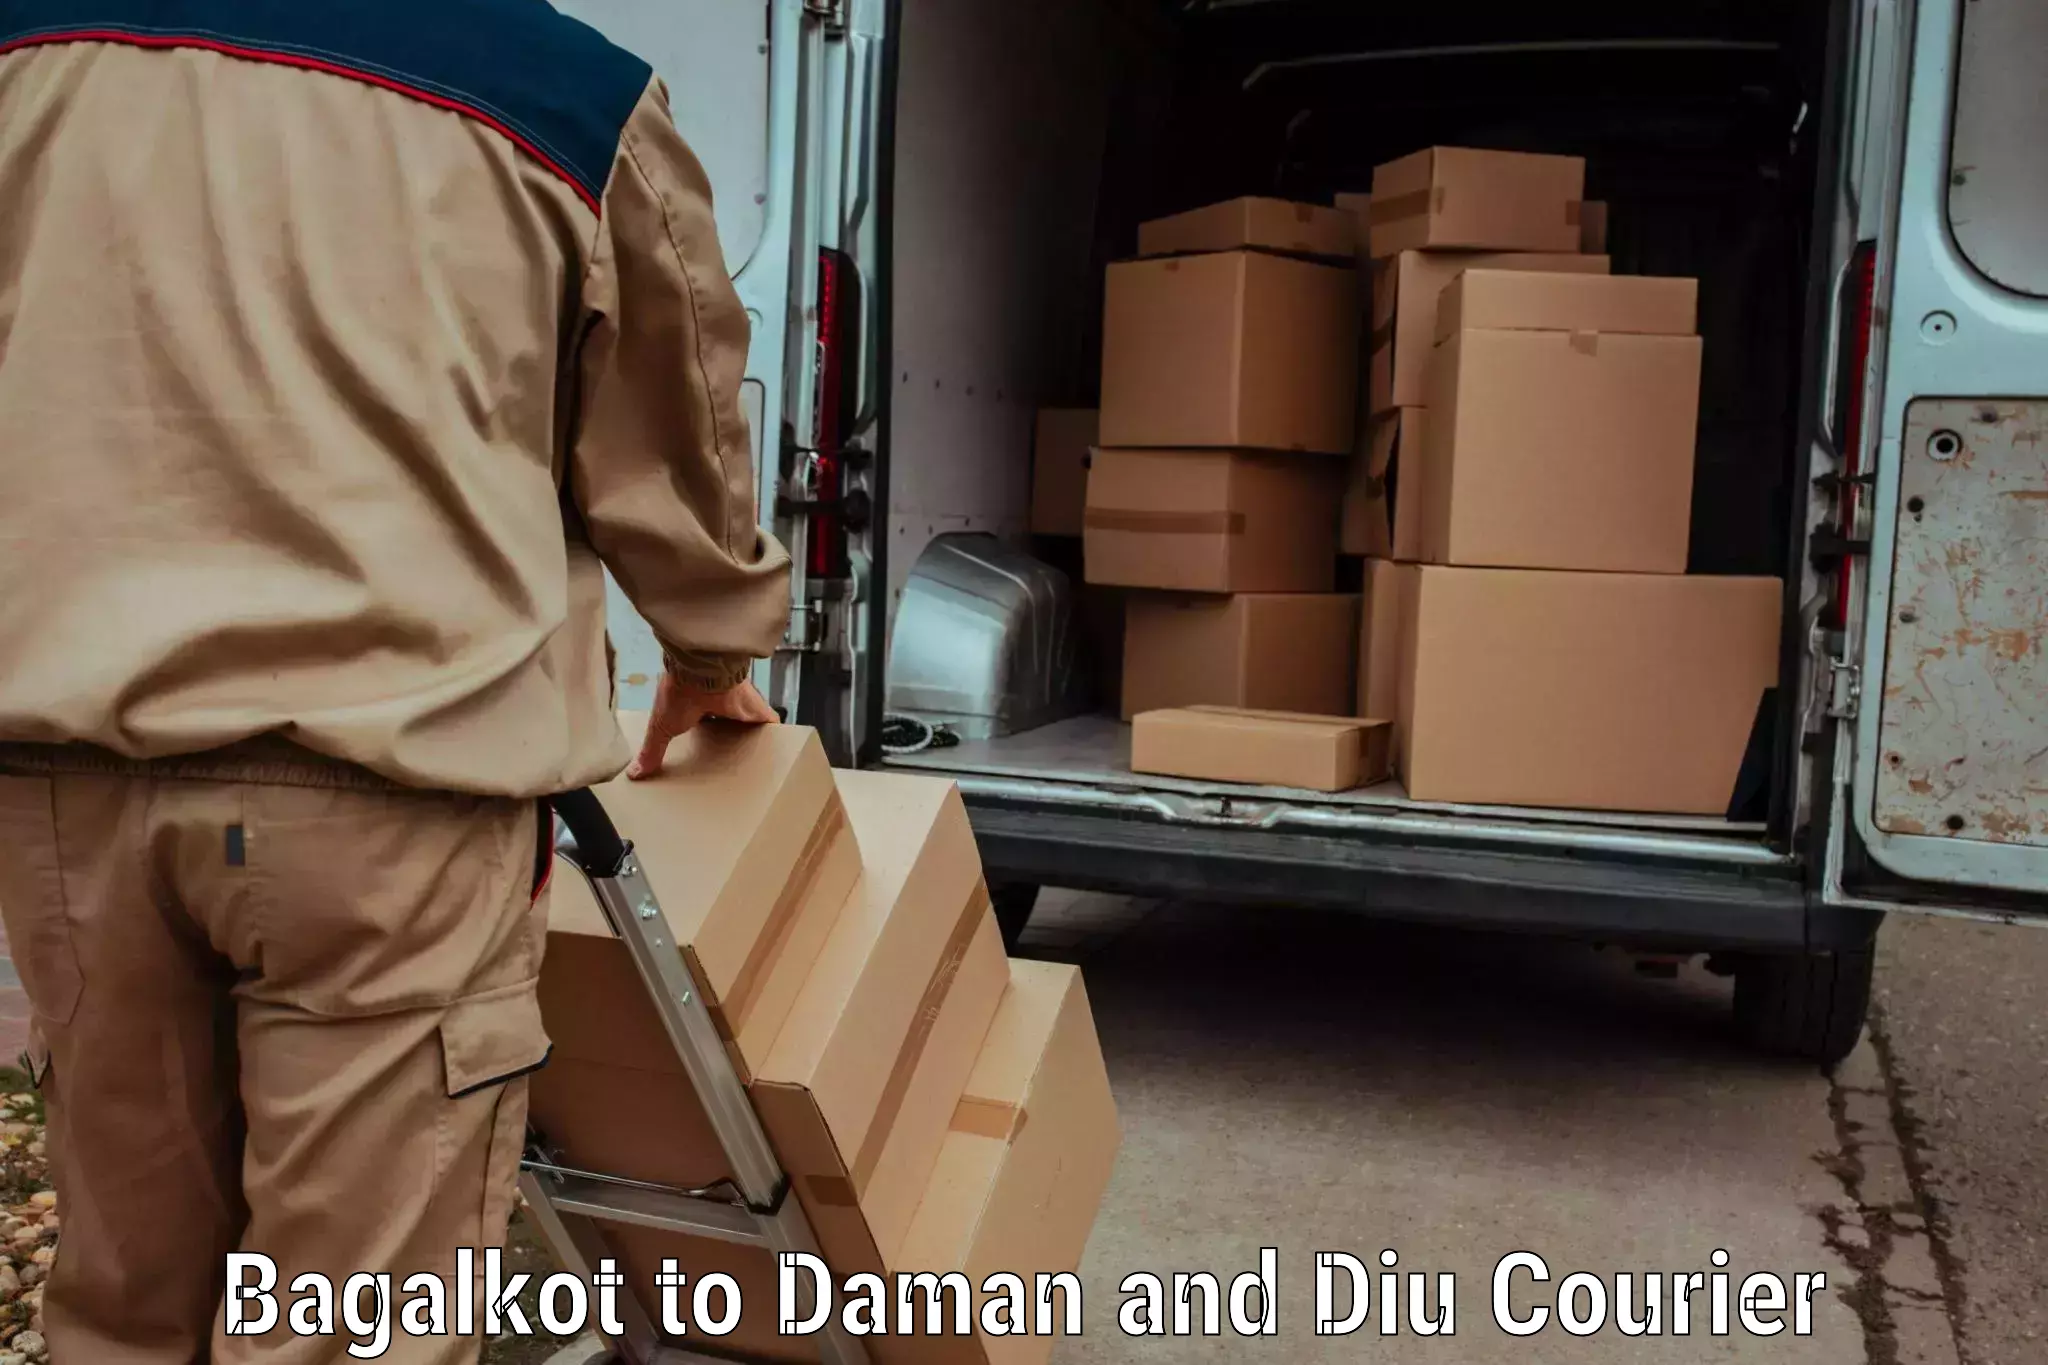 Baggage delivery solutions Bagalkot to Daman and Diu